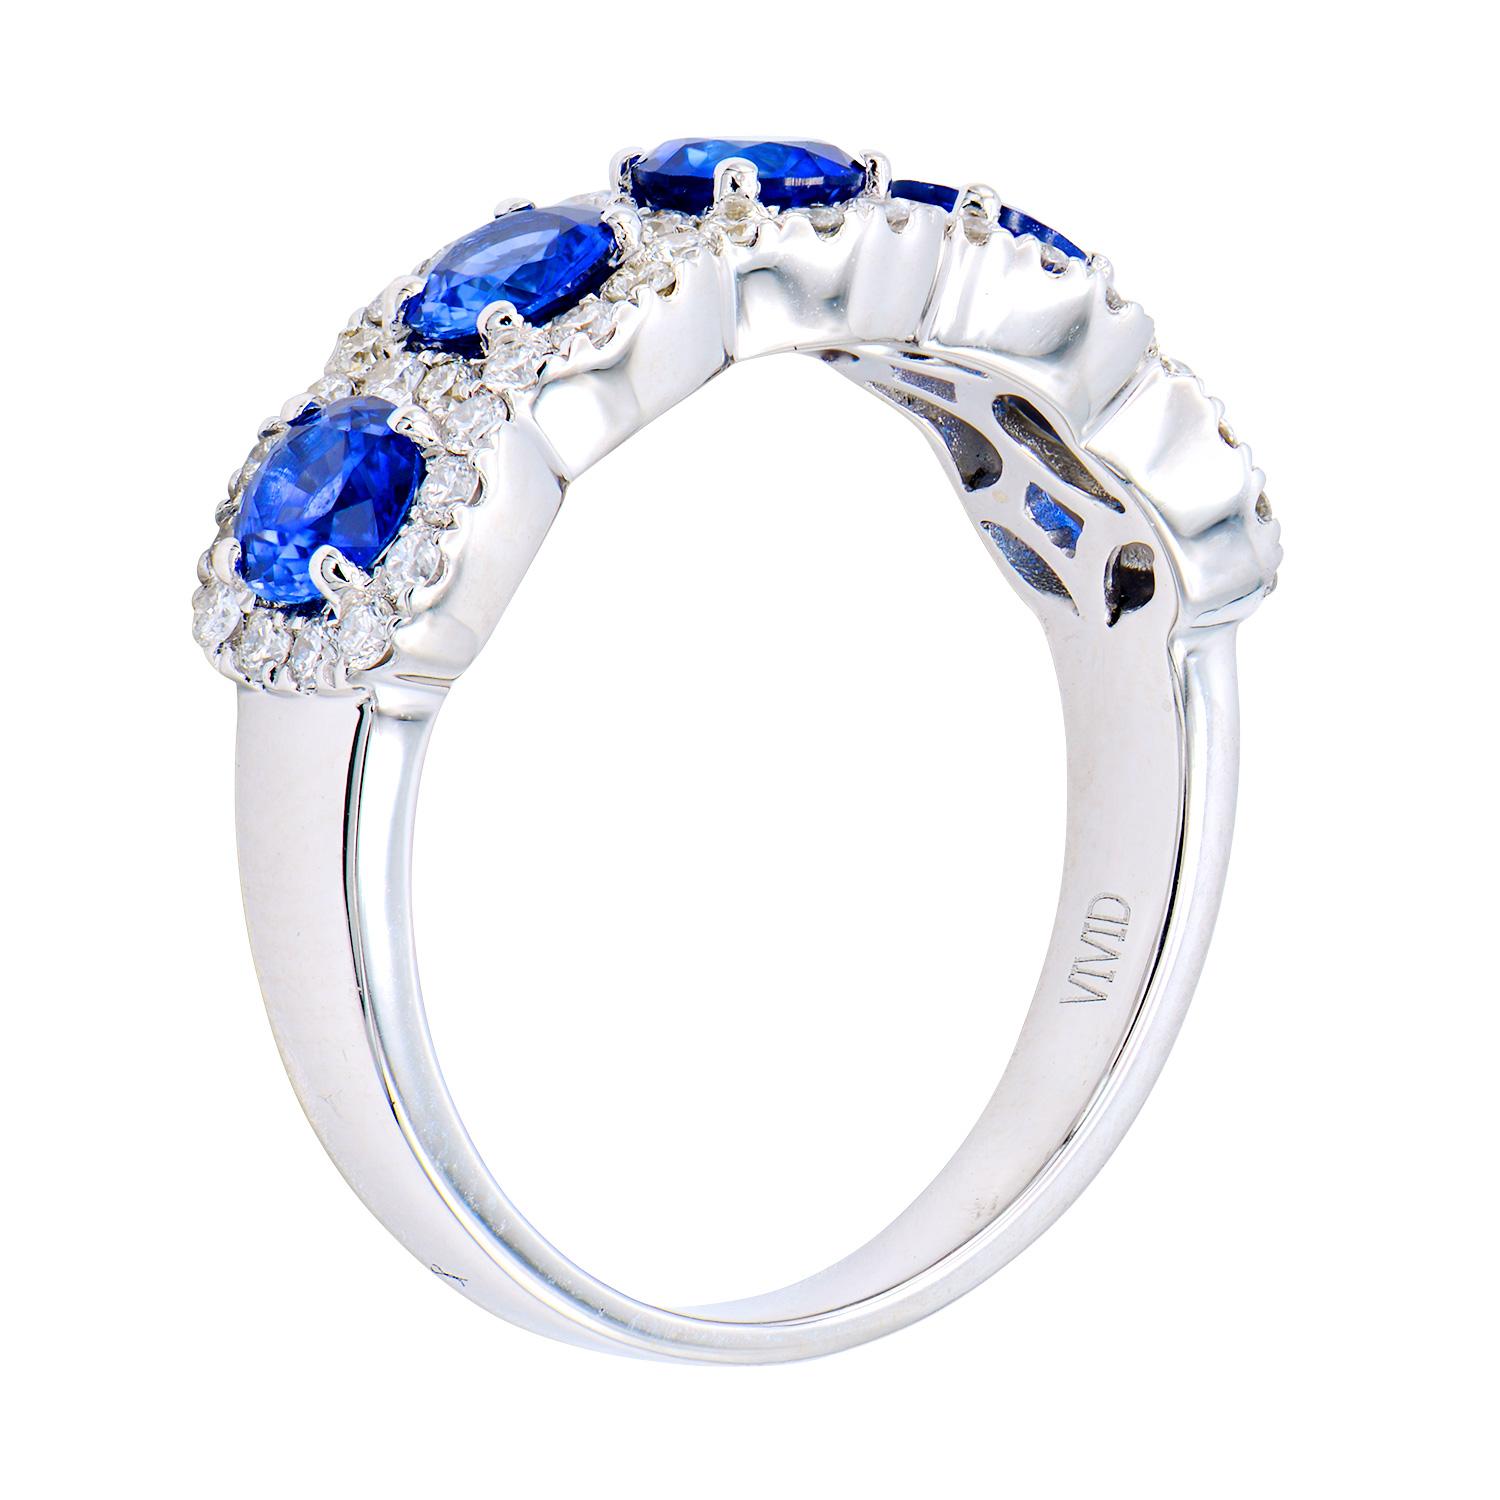 This sapphire and diamond band has 5 royal blue sapphires totaling 1.58 carats, Each sapphire is circled by VS2, G color diamonds totaling 0.43 carats which is made up by 52 round diamonds. These gorgeous stones are set in 4.0 grams of 18 karat